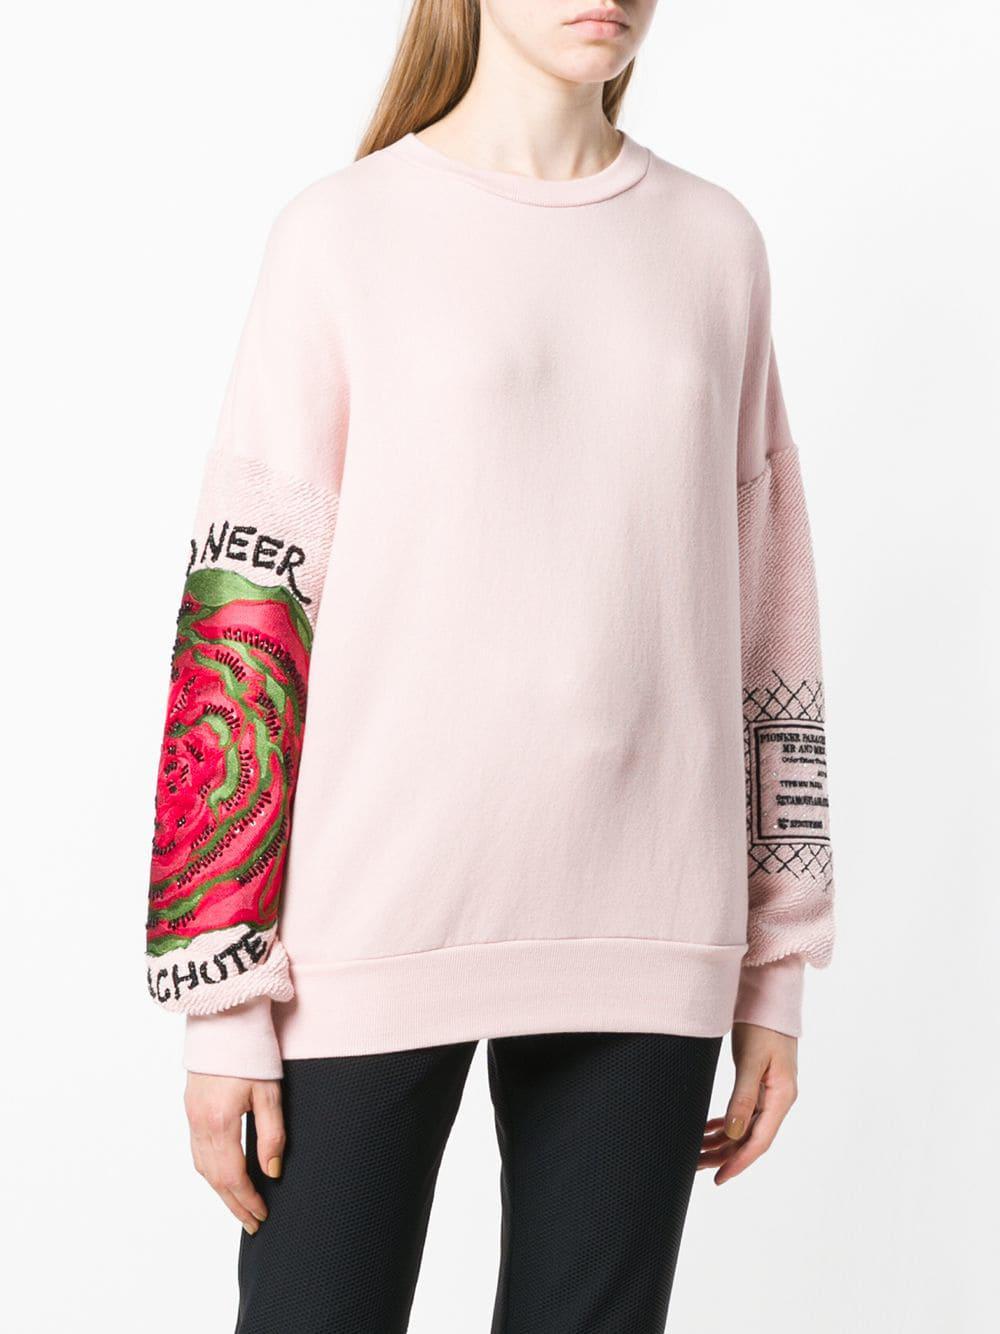 Mr & Mrs Italy Embroidered Floral Sweatshirt in Pink - Lyst